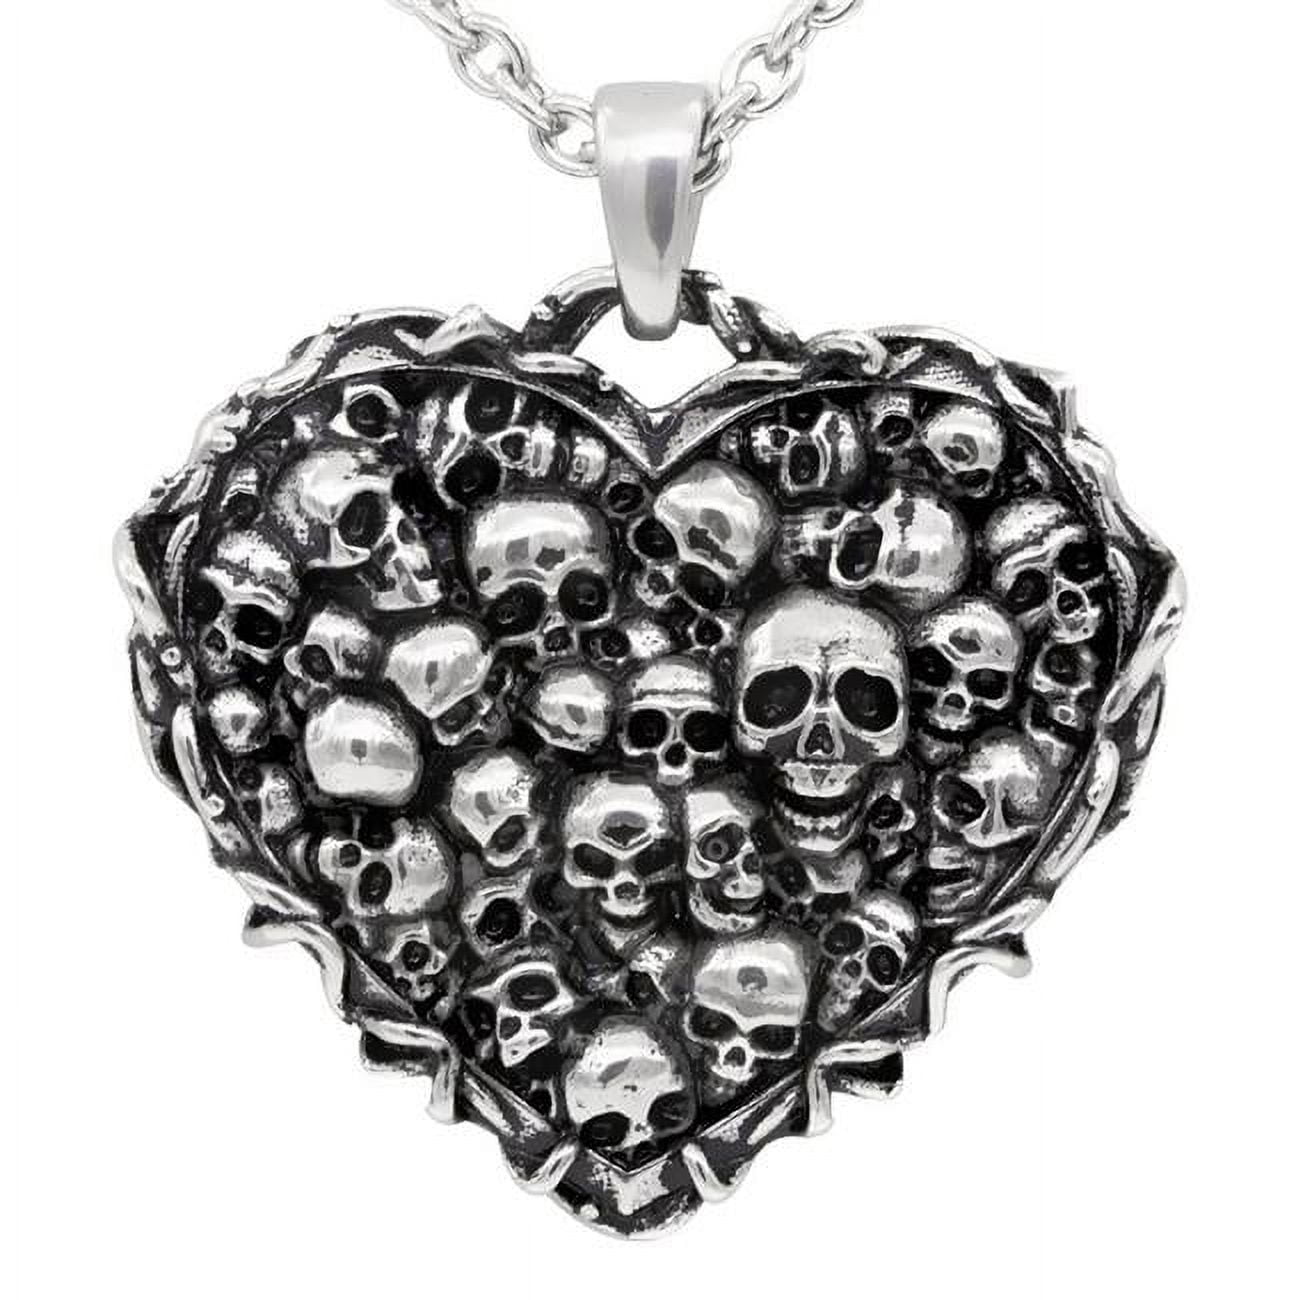 Cn134 Captivated Souls Heart Necklace